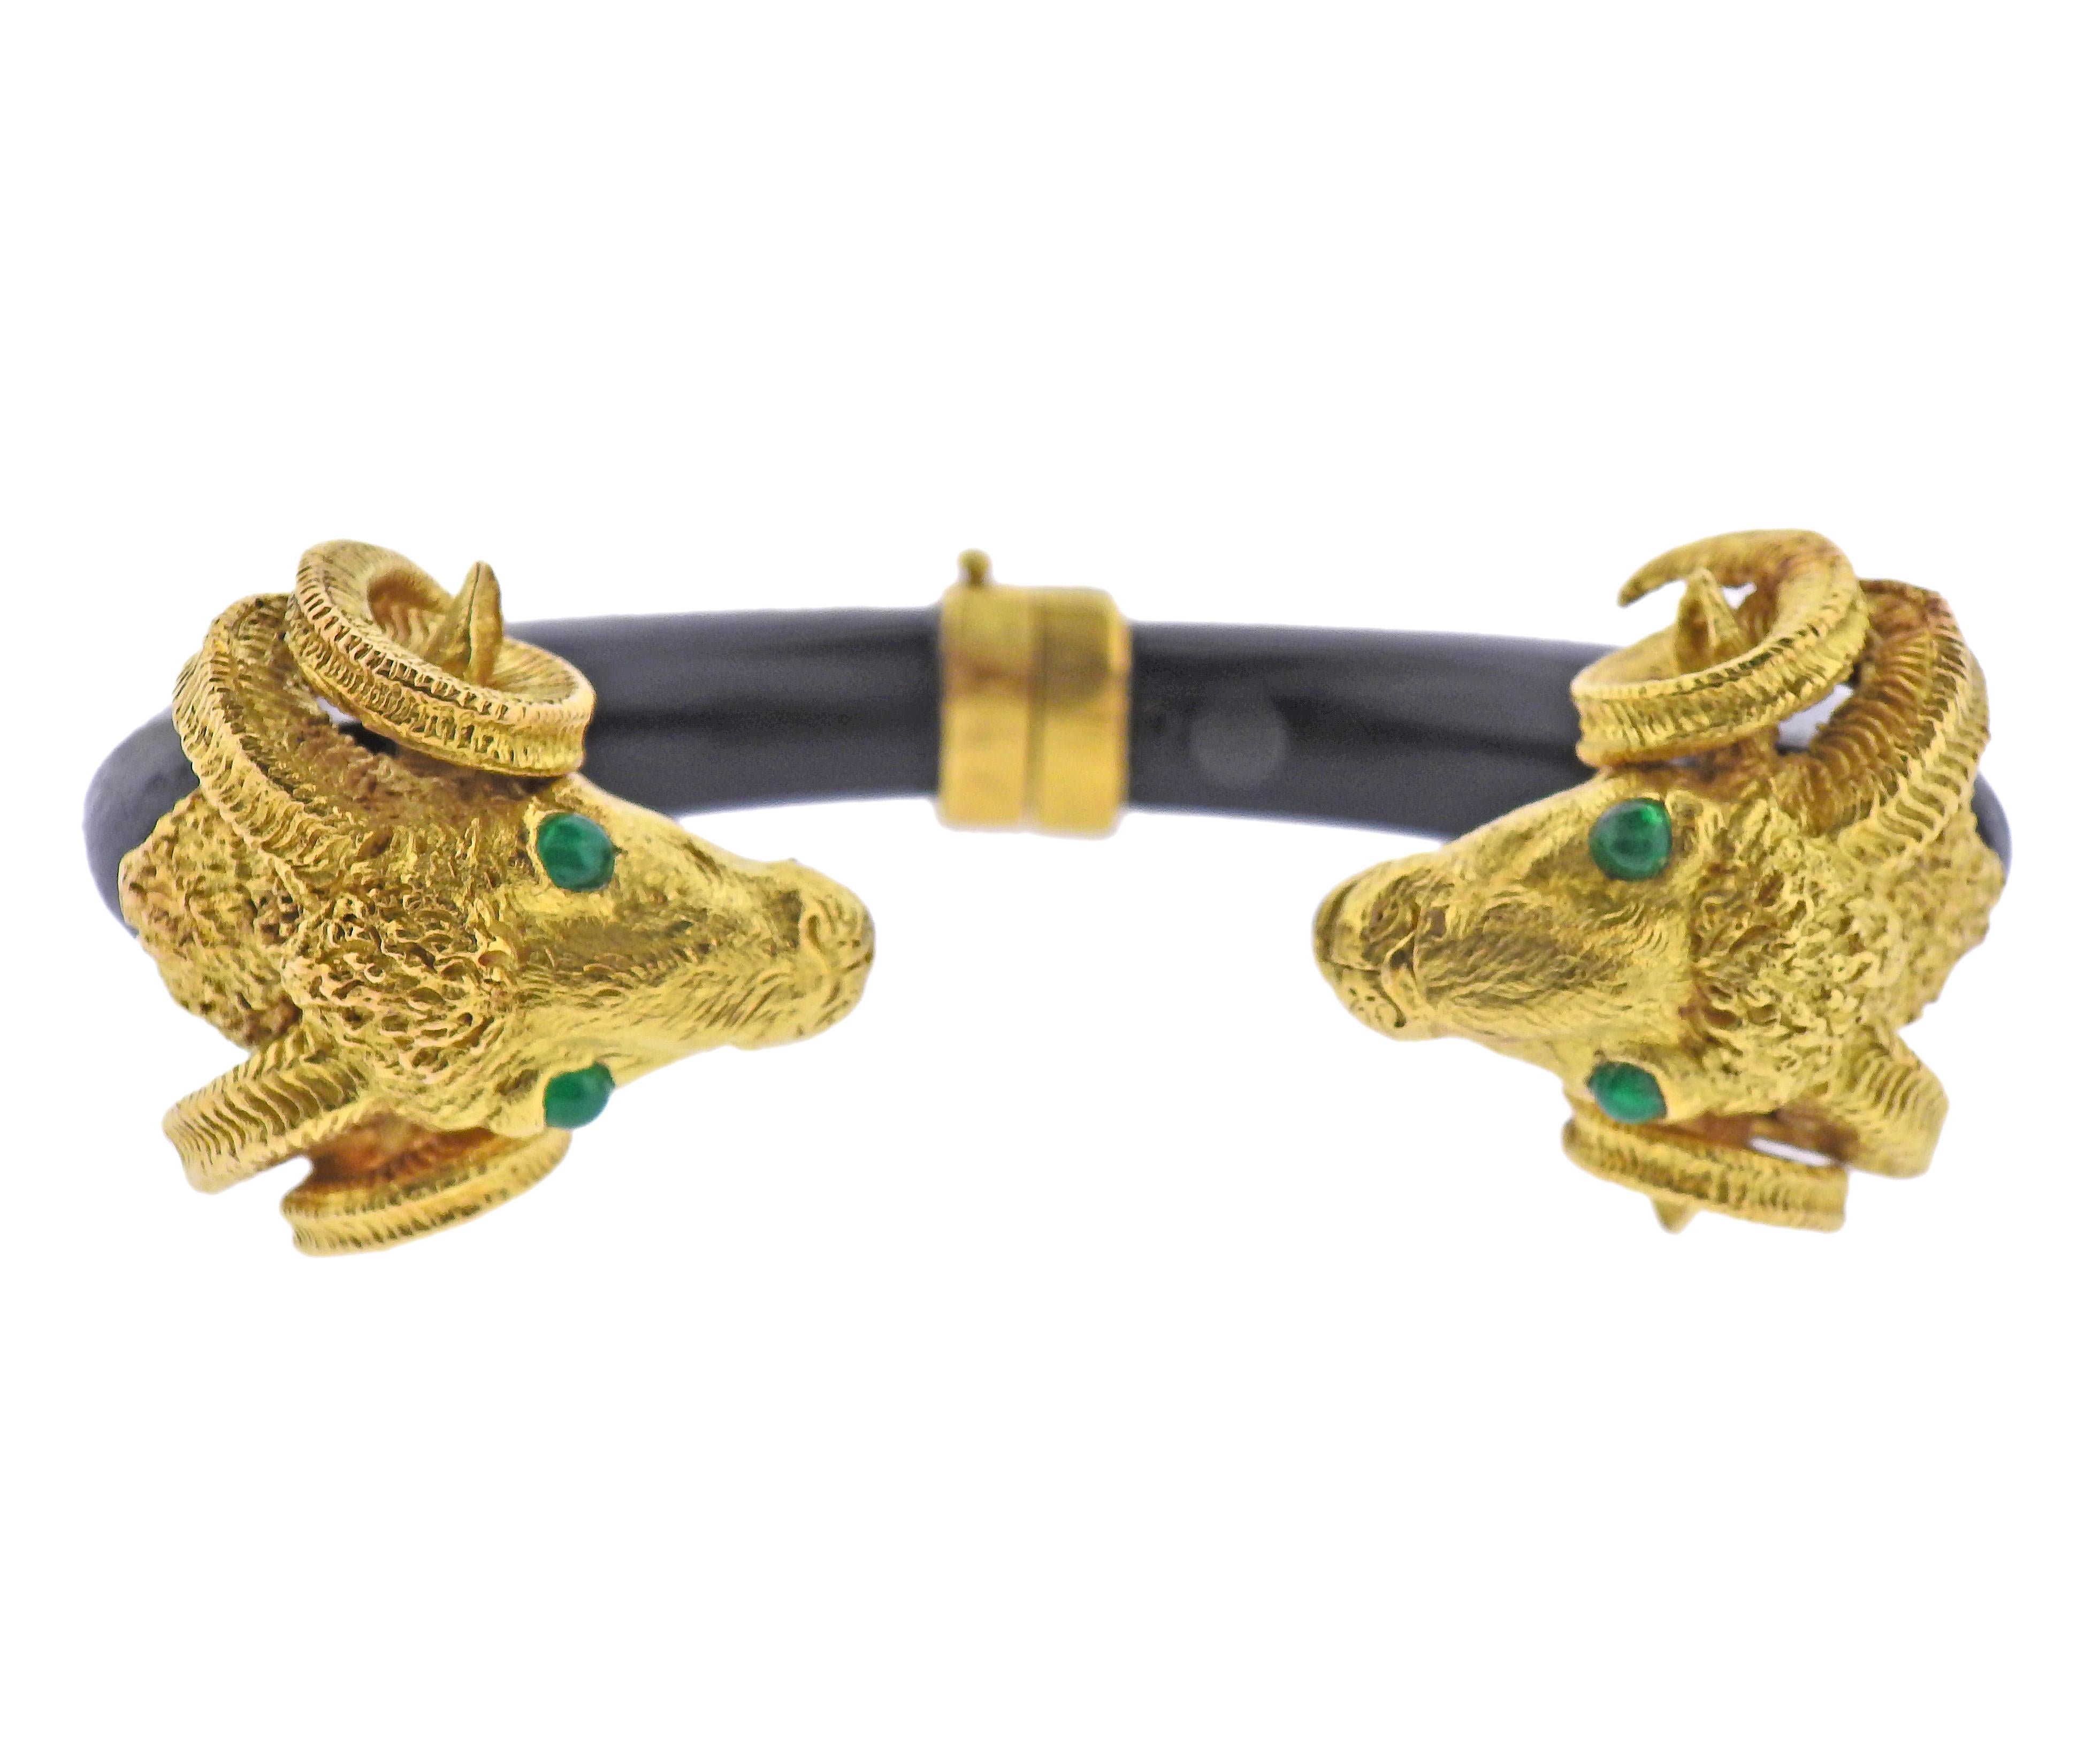 French made 18k gold ram's head bracelet, with ebony wood and emerald eyes. Bracelet will fit up to a 7.5